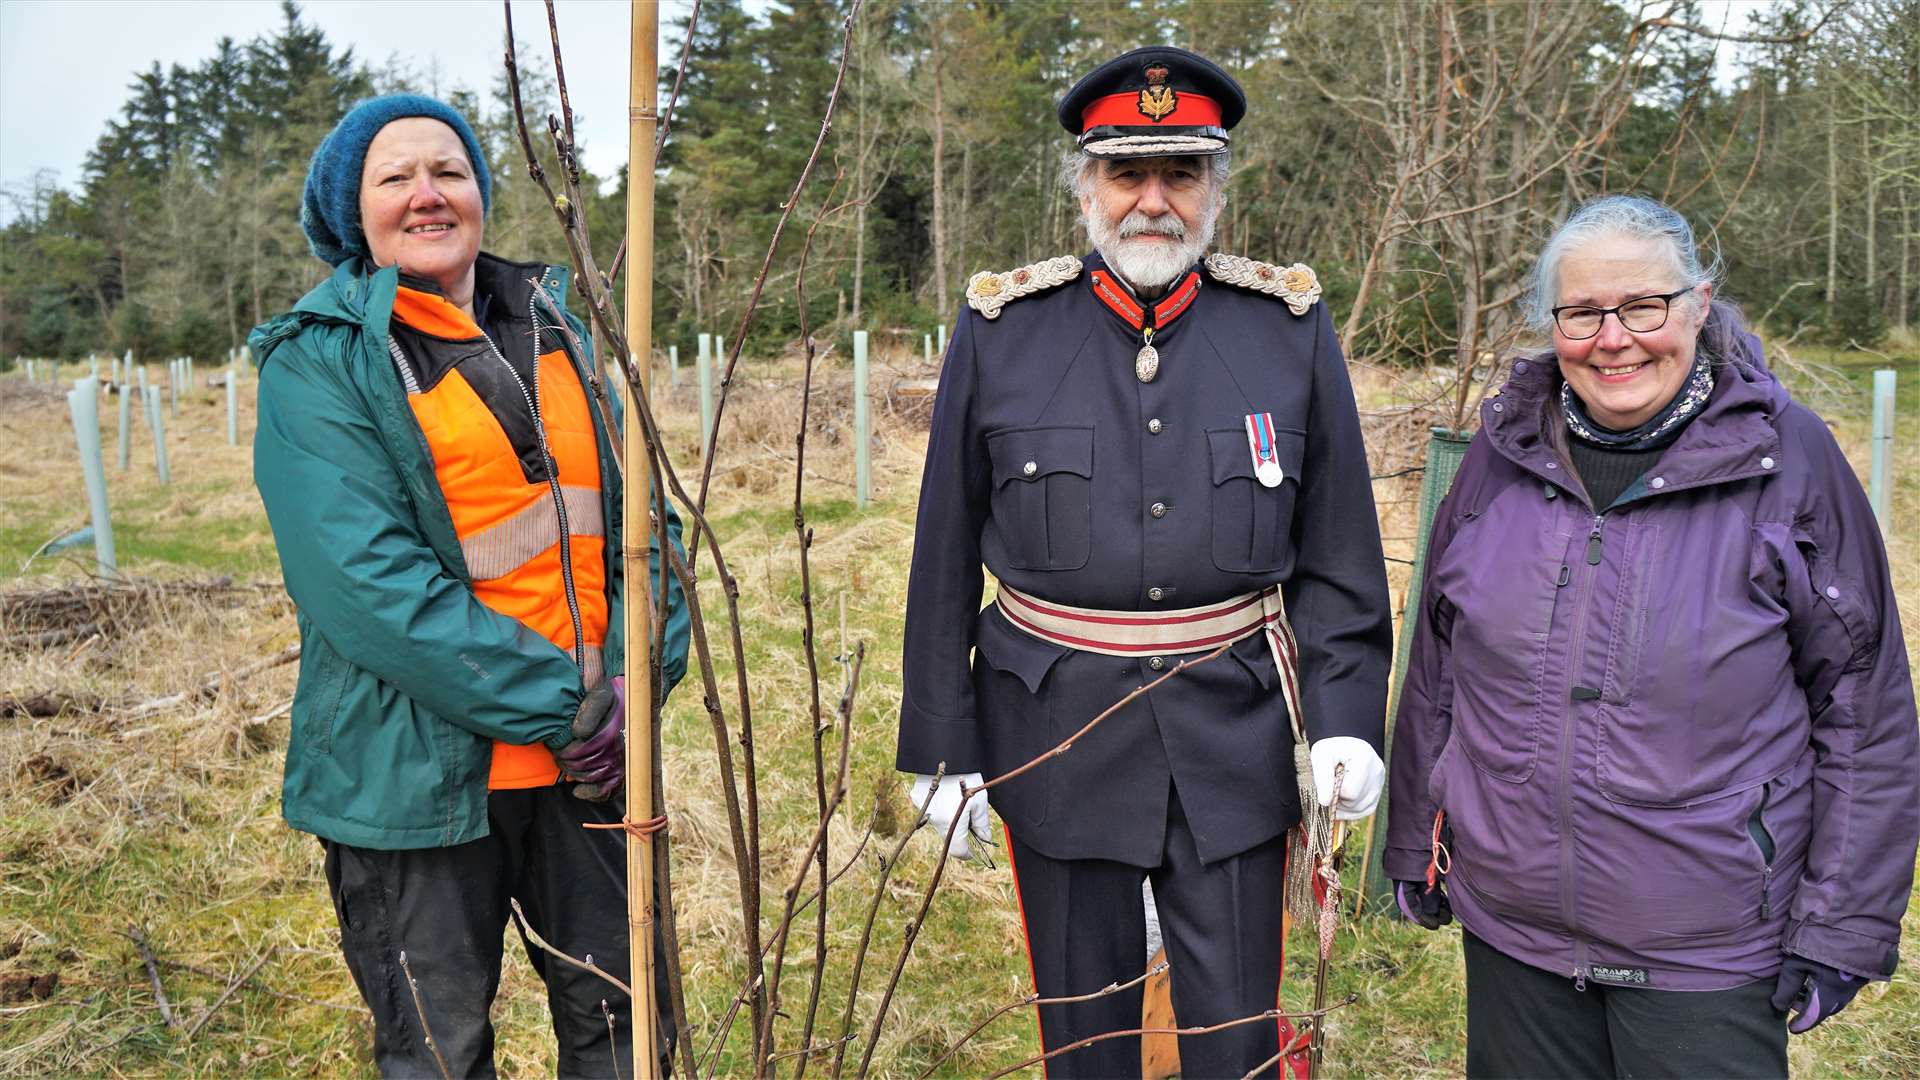 From left, Garance Warburton is the forest development officer of Dunnet Forestry Trust, next to Lord Thurso in his role as Lord-Lieutenant of Caithness, and beside Shona Scatchard who is treasurer of the trust. Picture: DGS